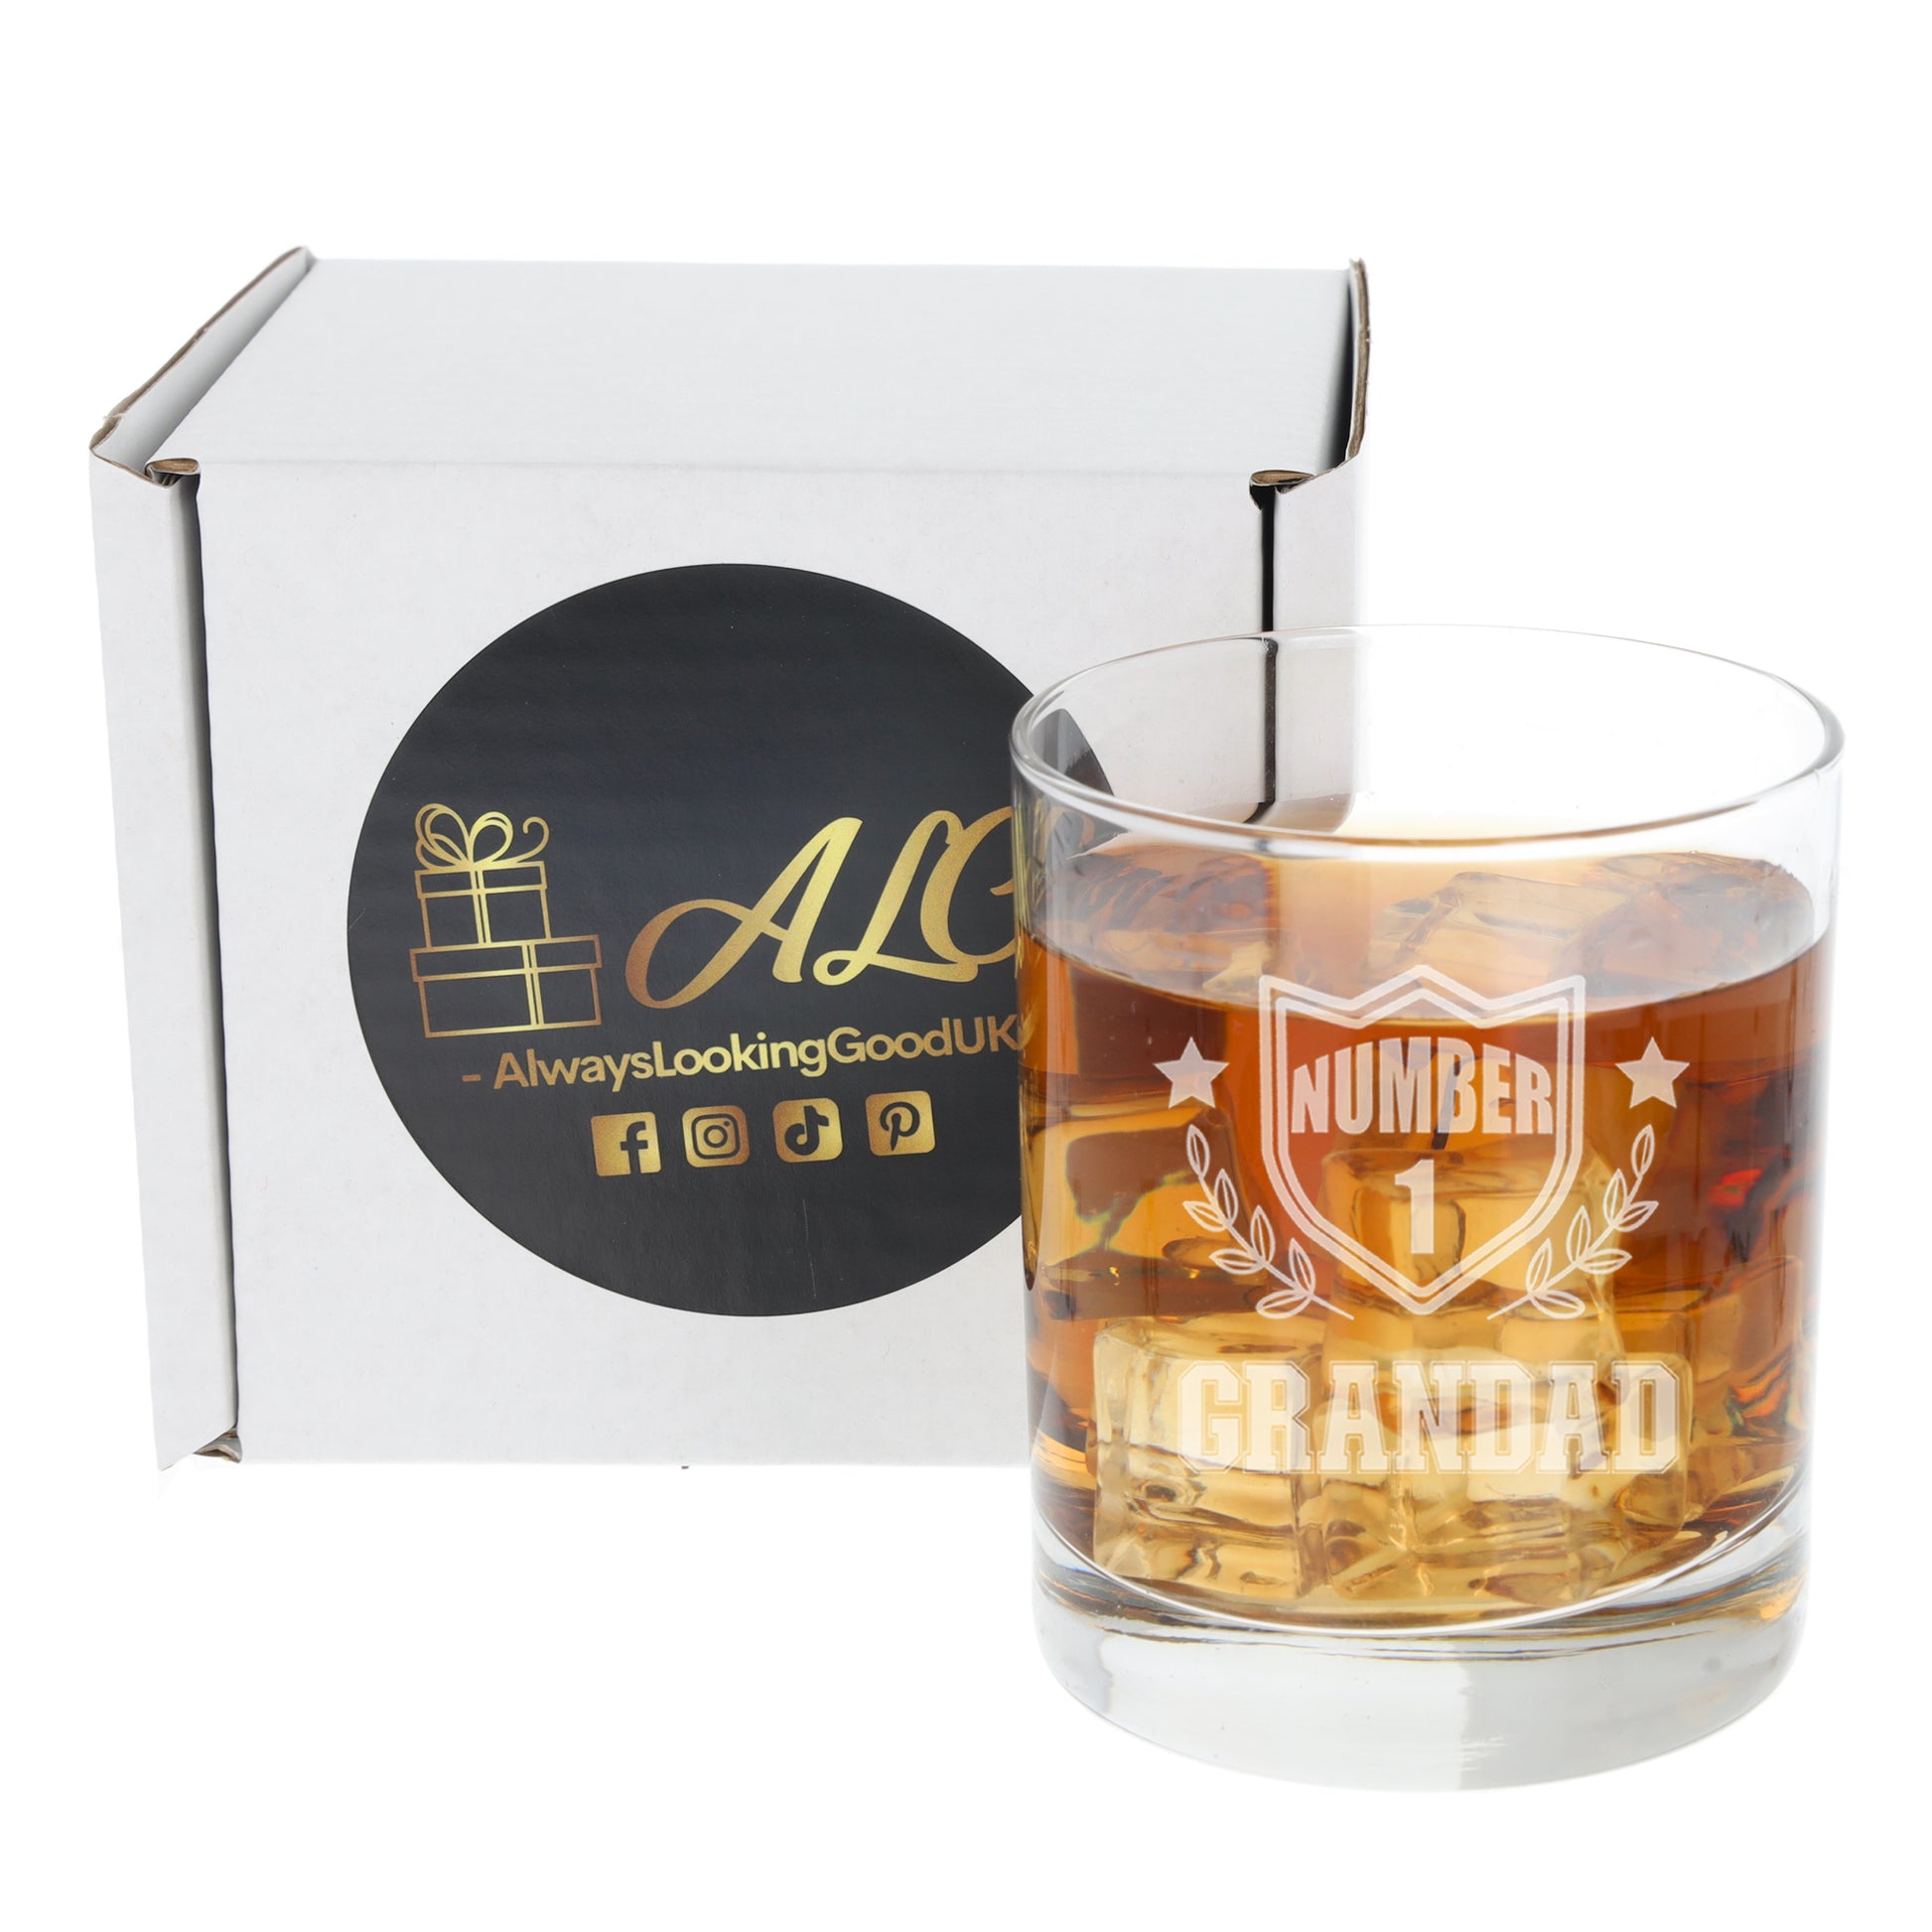 Engraved "Number 1 Grandad" Whisky Glass and/or Coaster Set  - Always Looking Good - Glass Only  